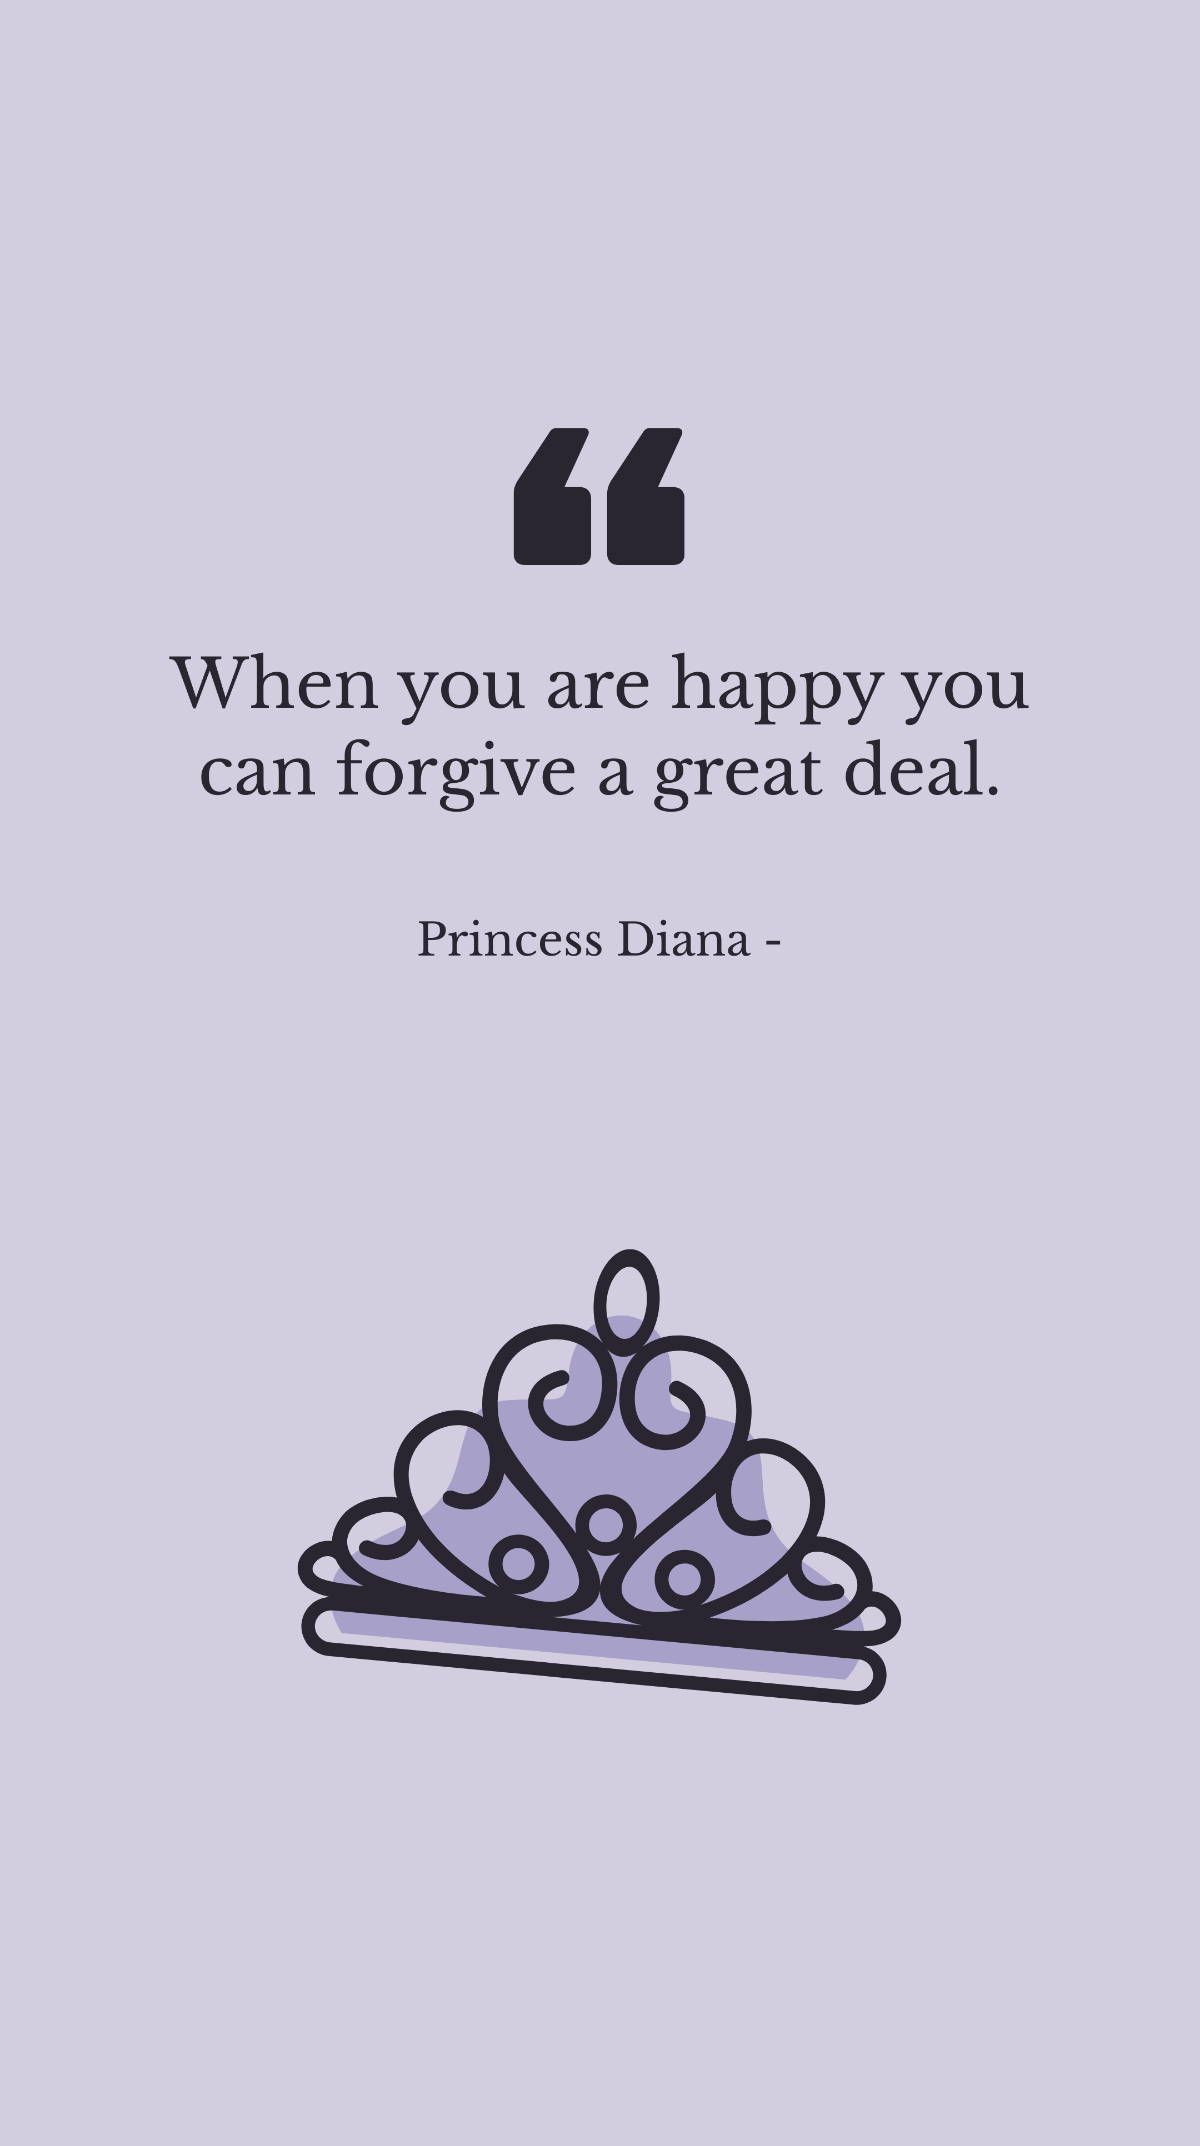 Princess Diana - When you are happy you can forgive a great deal.